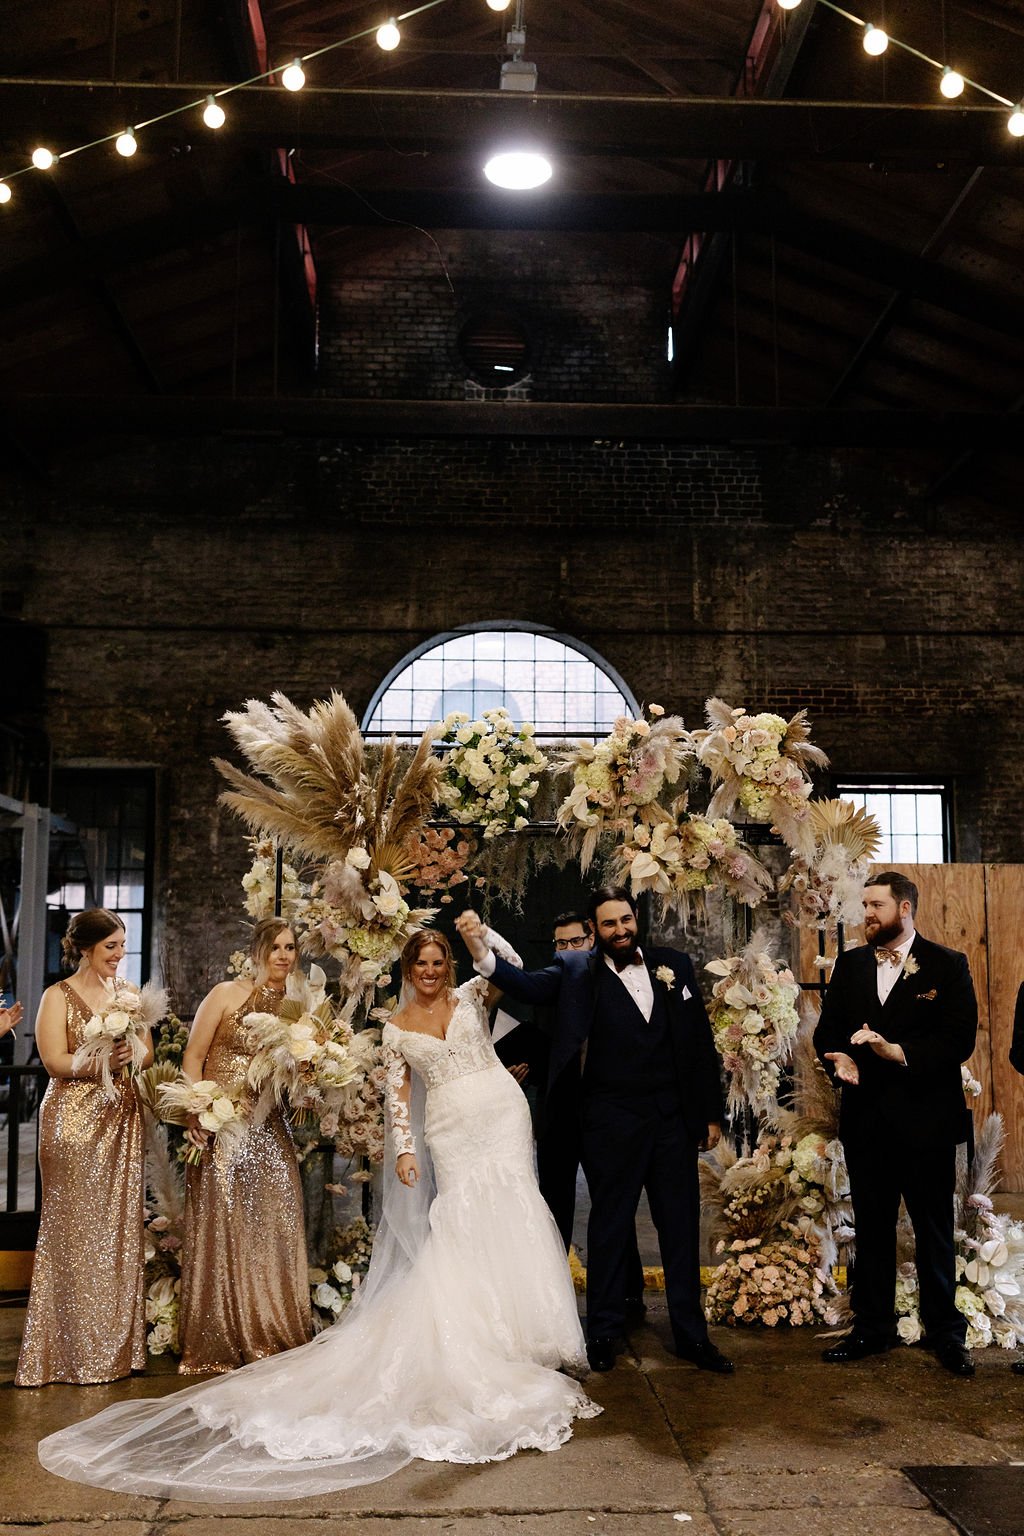 katie-and-zacks-boho-chic-new-years-eve-wedding-in-savannah-georgia-at-the-georgia-state-railroad-museum-and-the-perry-lane-hotel-featuring-wedding-florals-by-savannah-florist-ivory-and-beau-savannah-wedding-savannah-wedding-florist-14.jpg